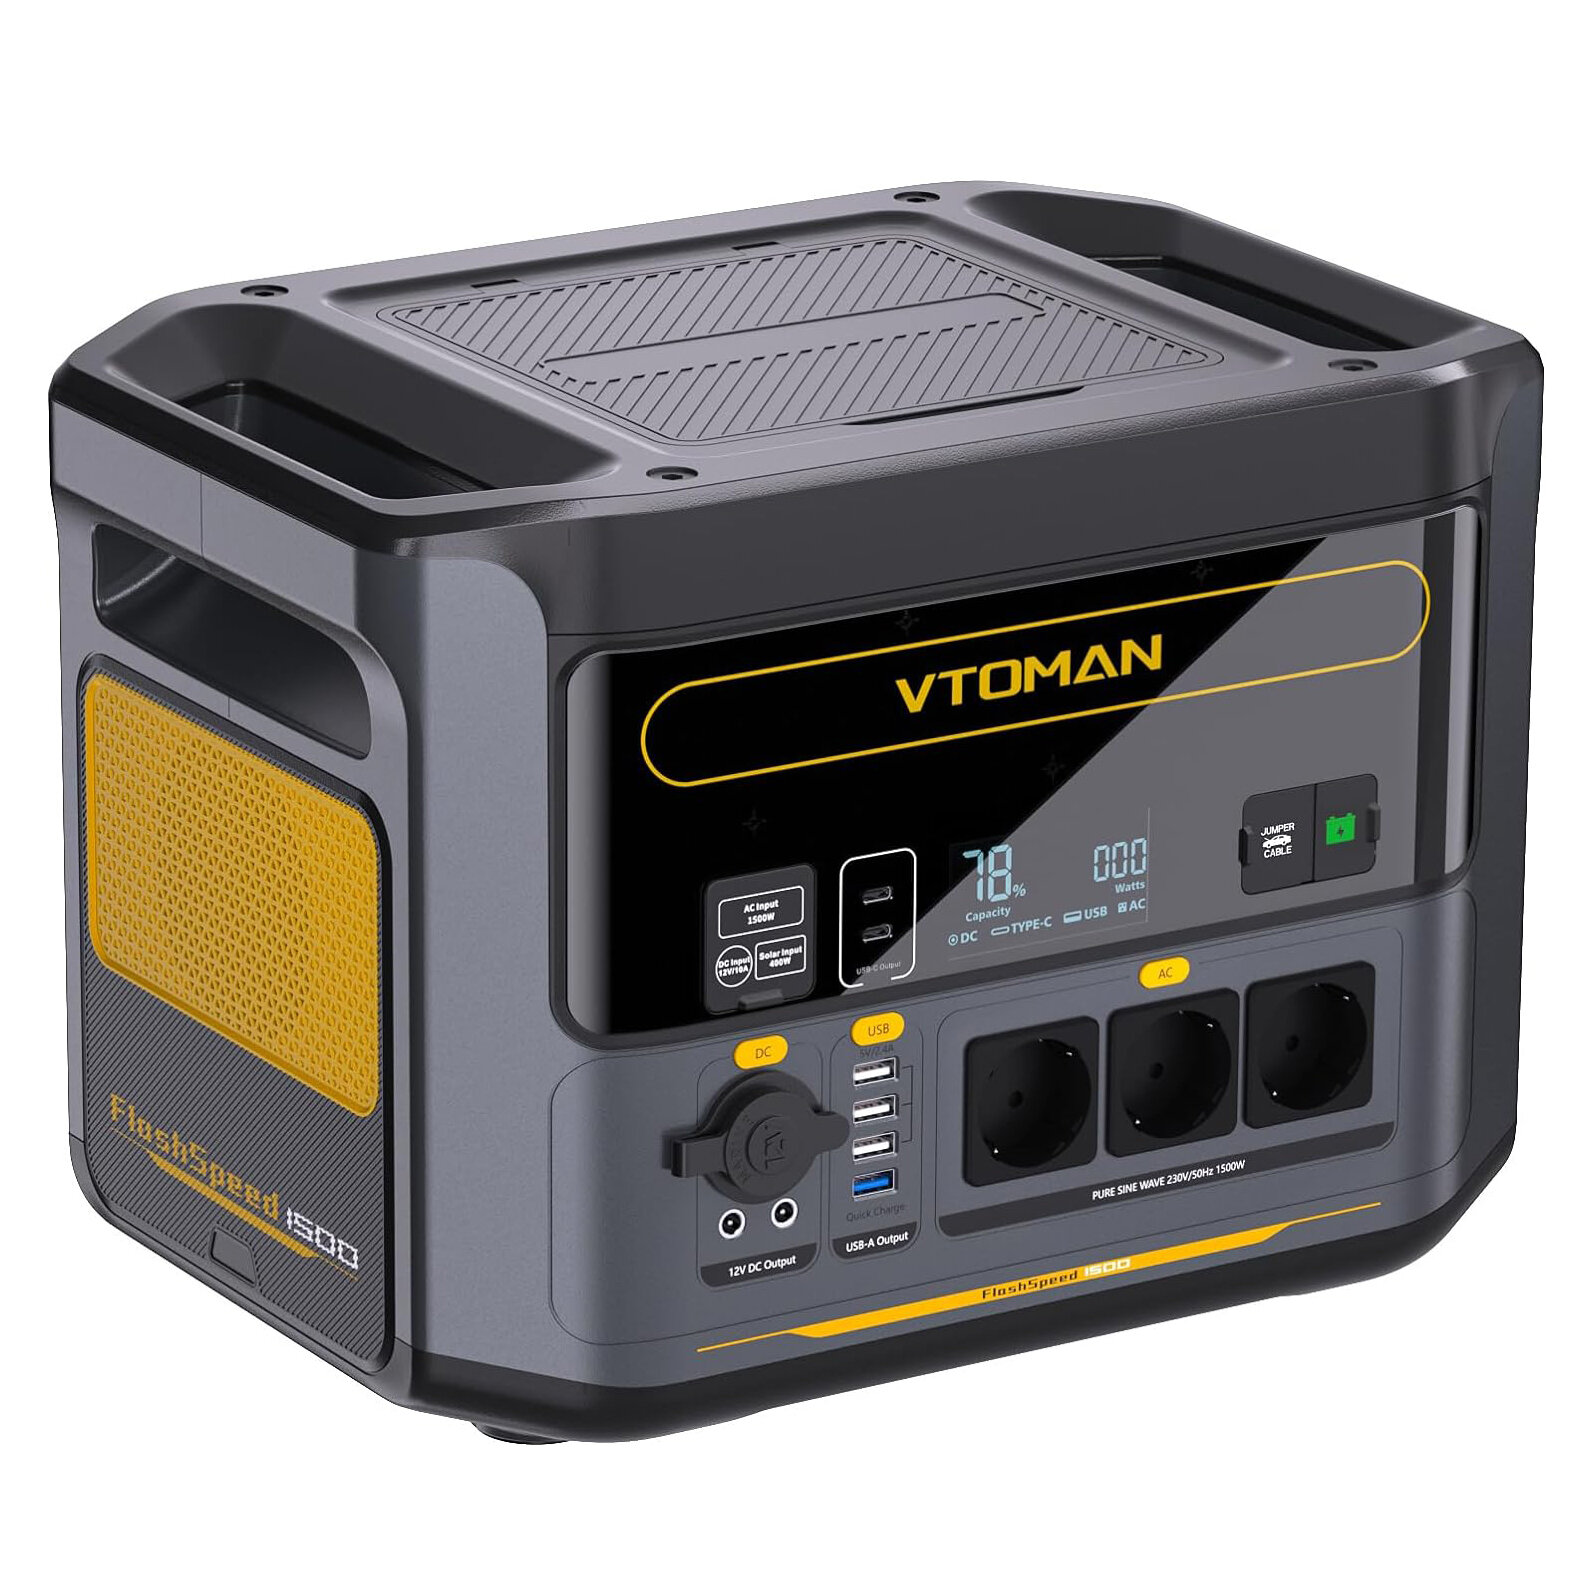 [EU Direct] VTOMAN FlashSpeed 1500 Portable Powerstation 1548Wh Full Charge in 1H, LiFePO4 Battery Powered Solar Generator with AC 230V/1500W Output/Input, 100W USB Port, Outdoor/Indoor UPS for Home Backup RV, Camping, Blackout EU Plug